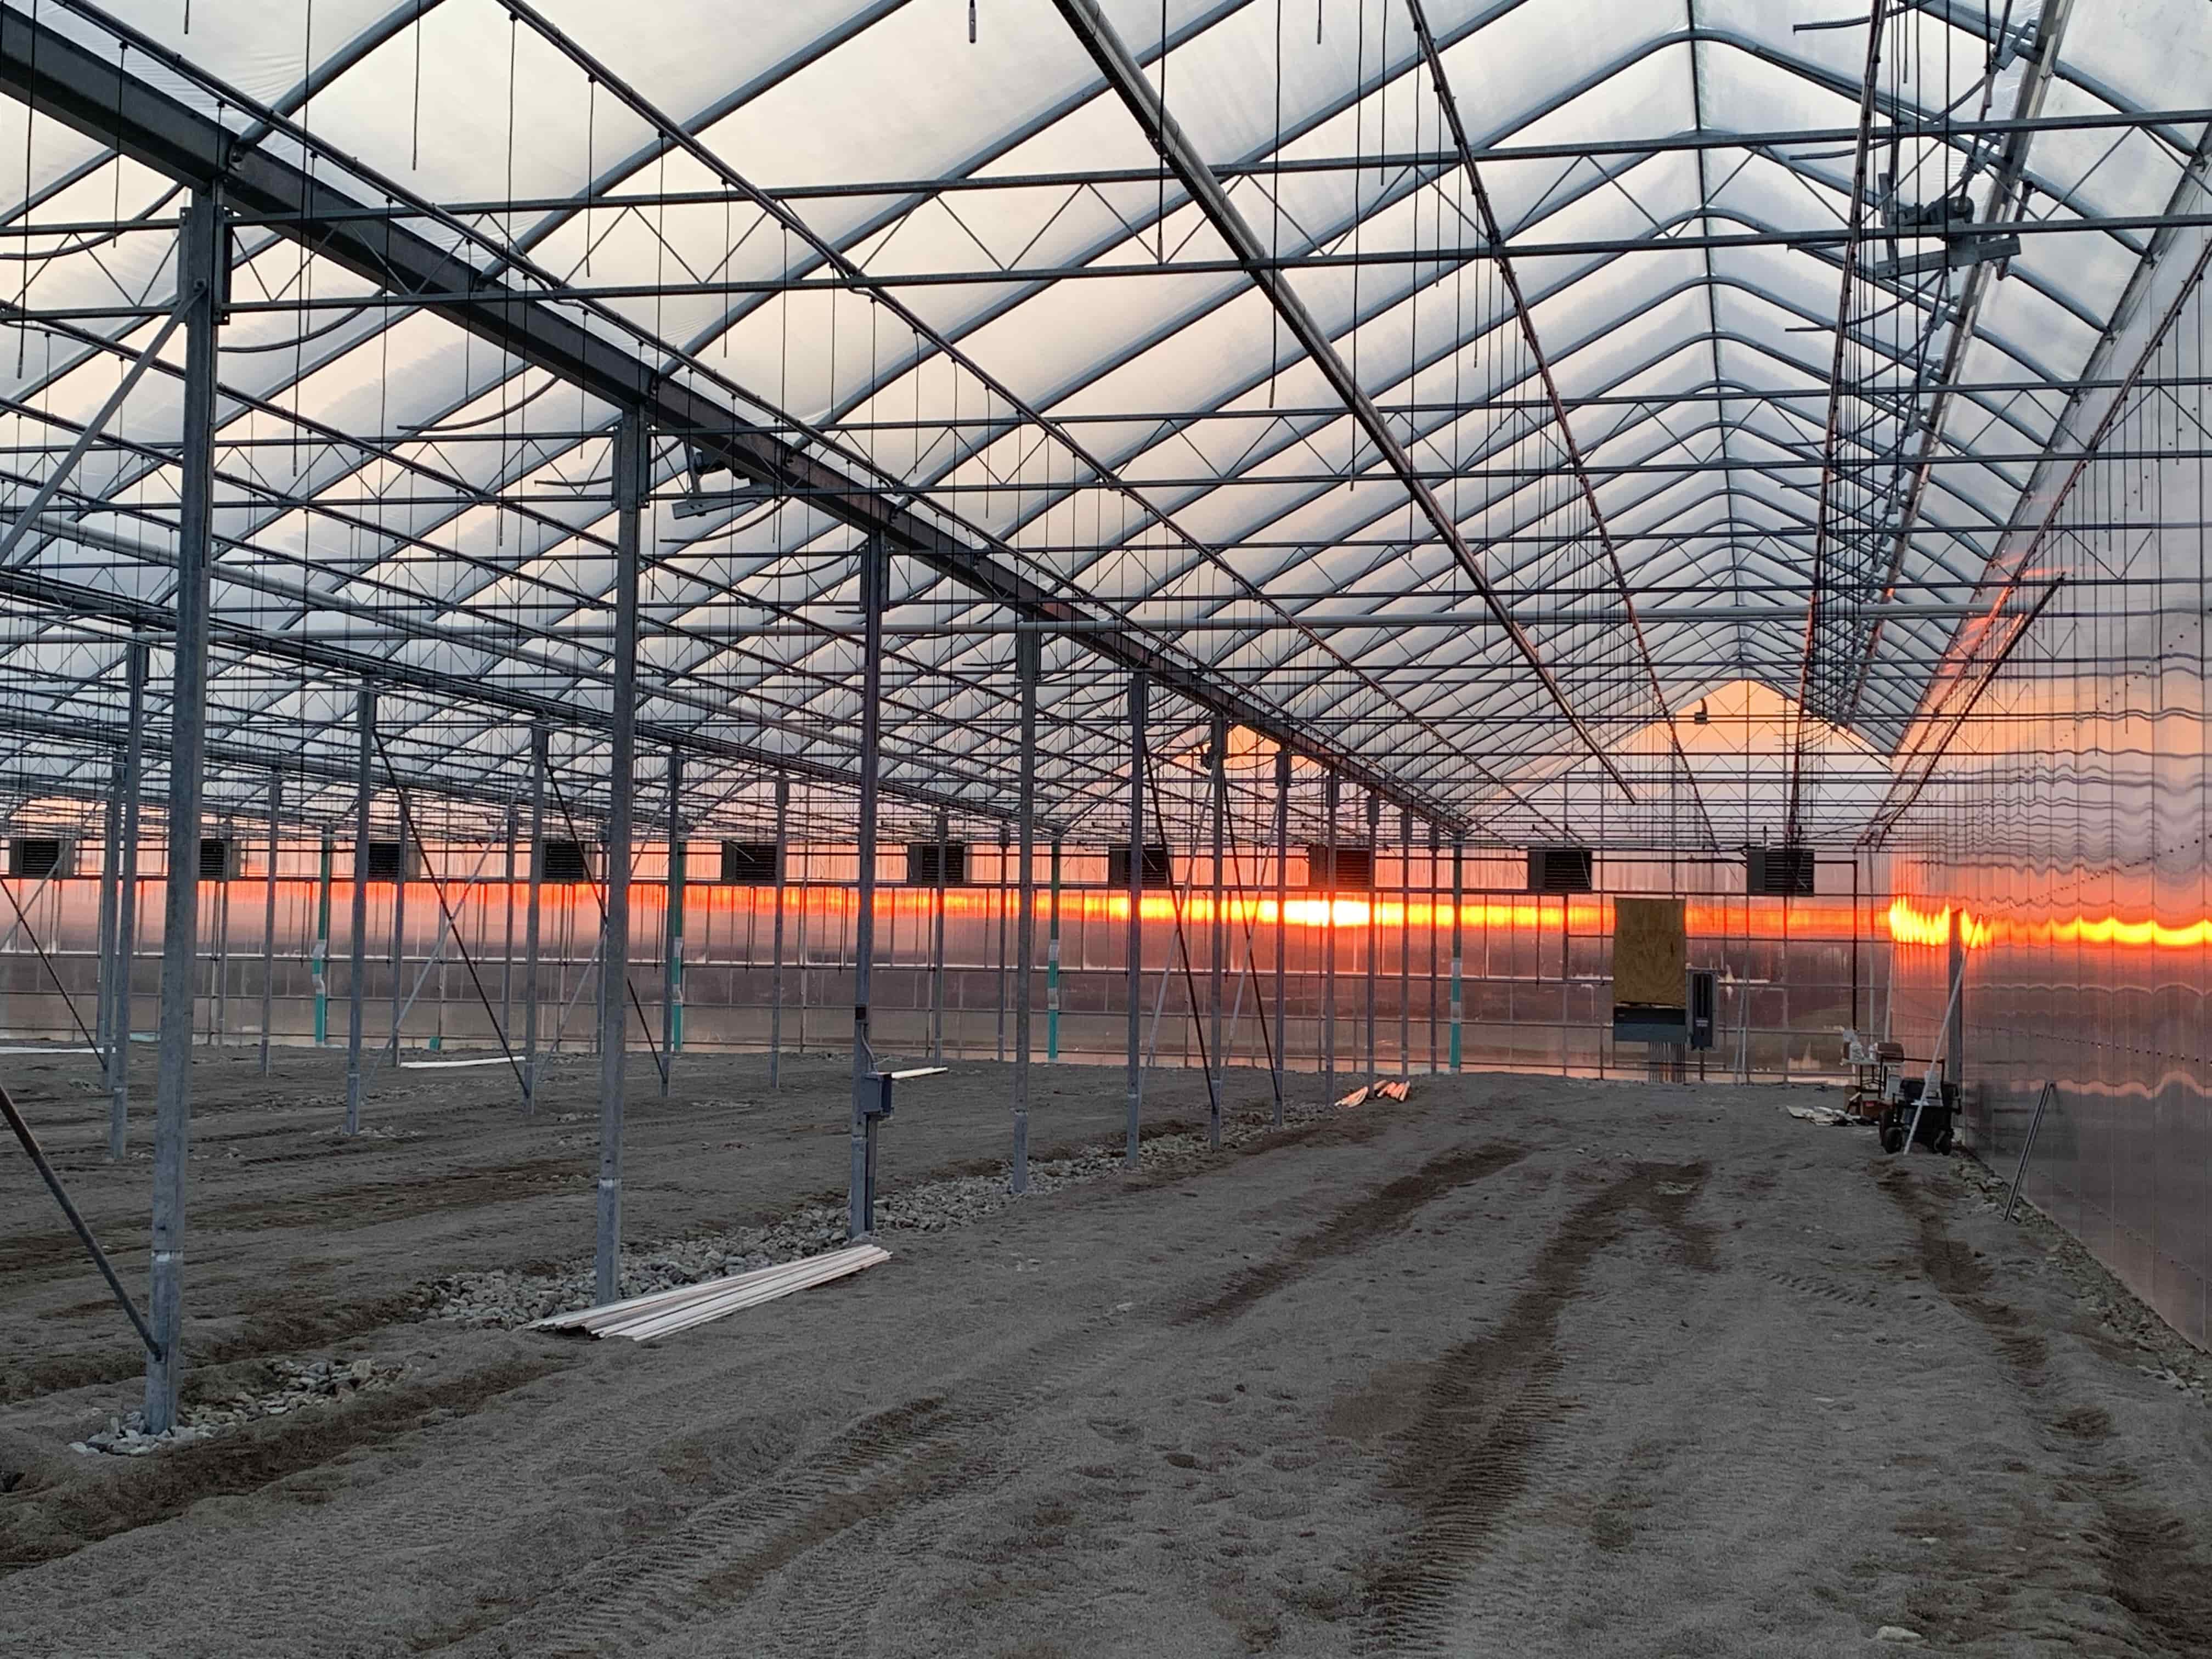 Greenhouse structure with sunset